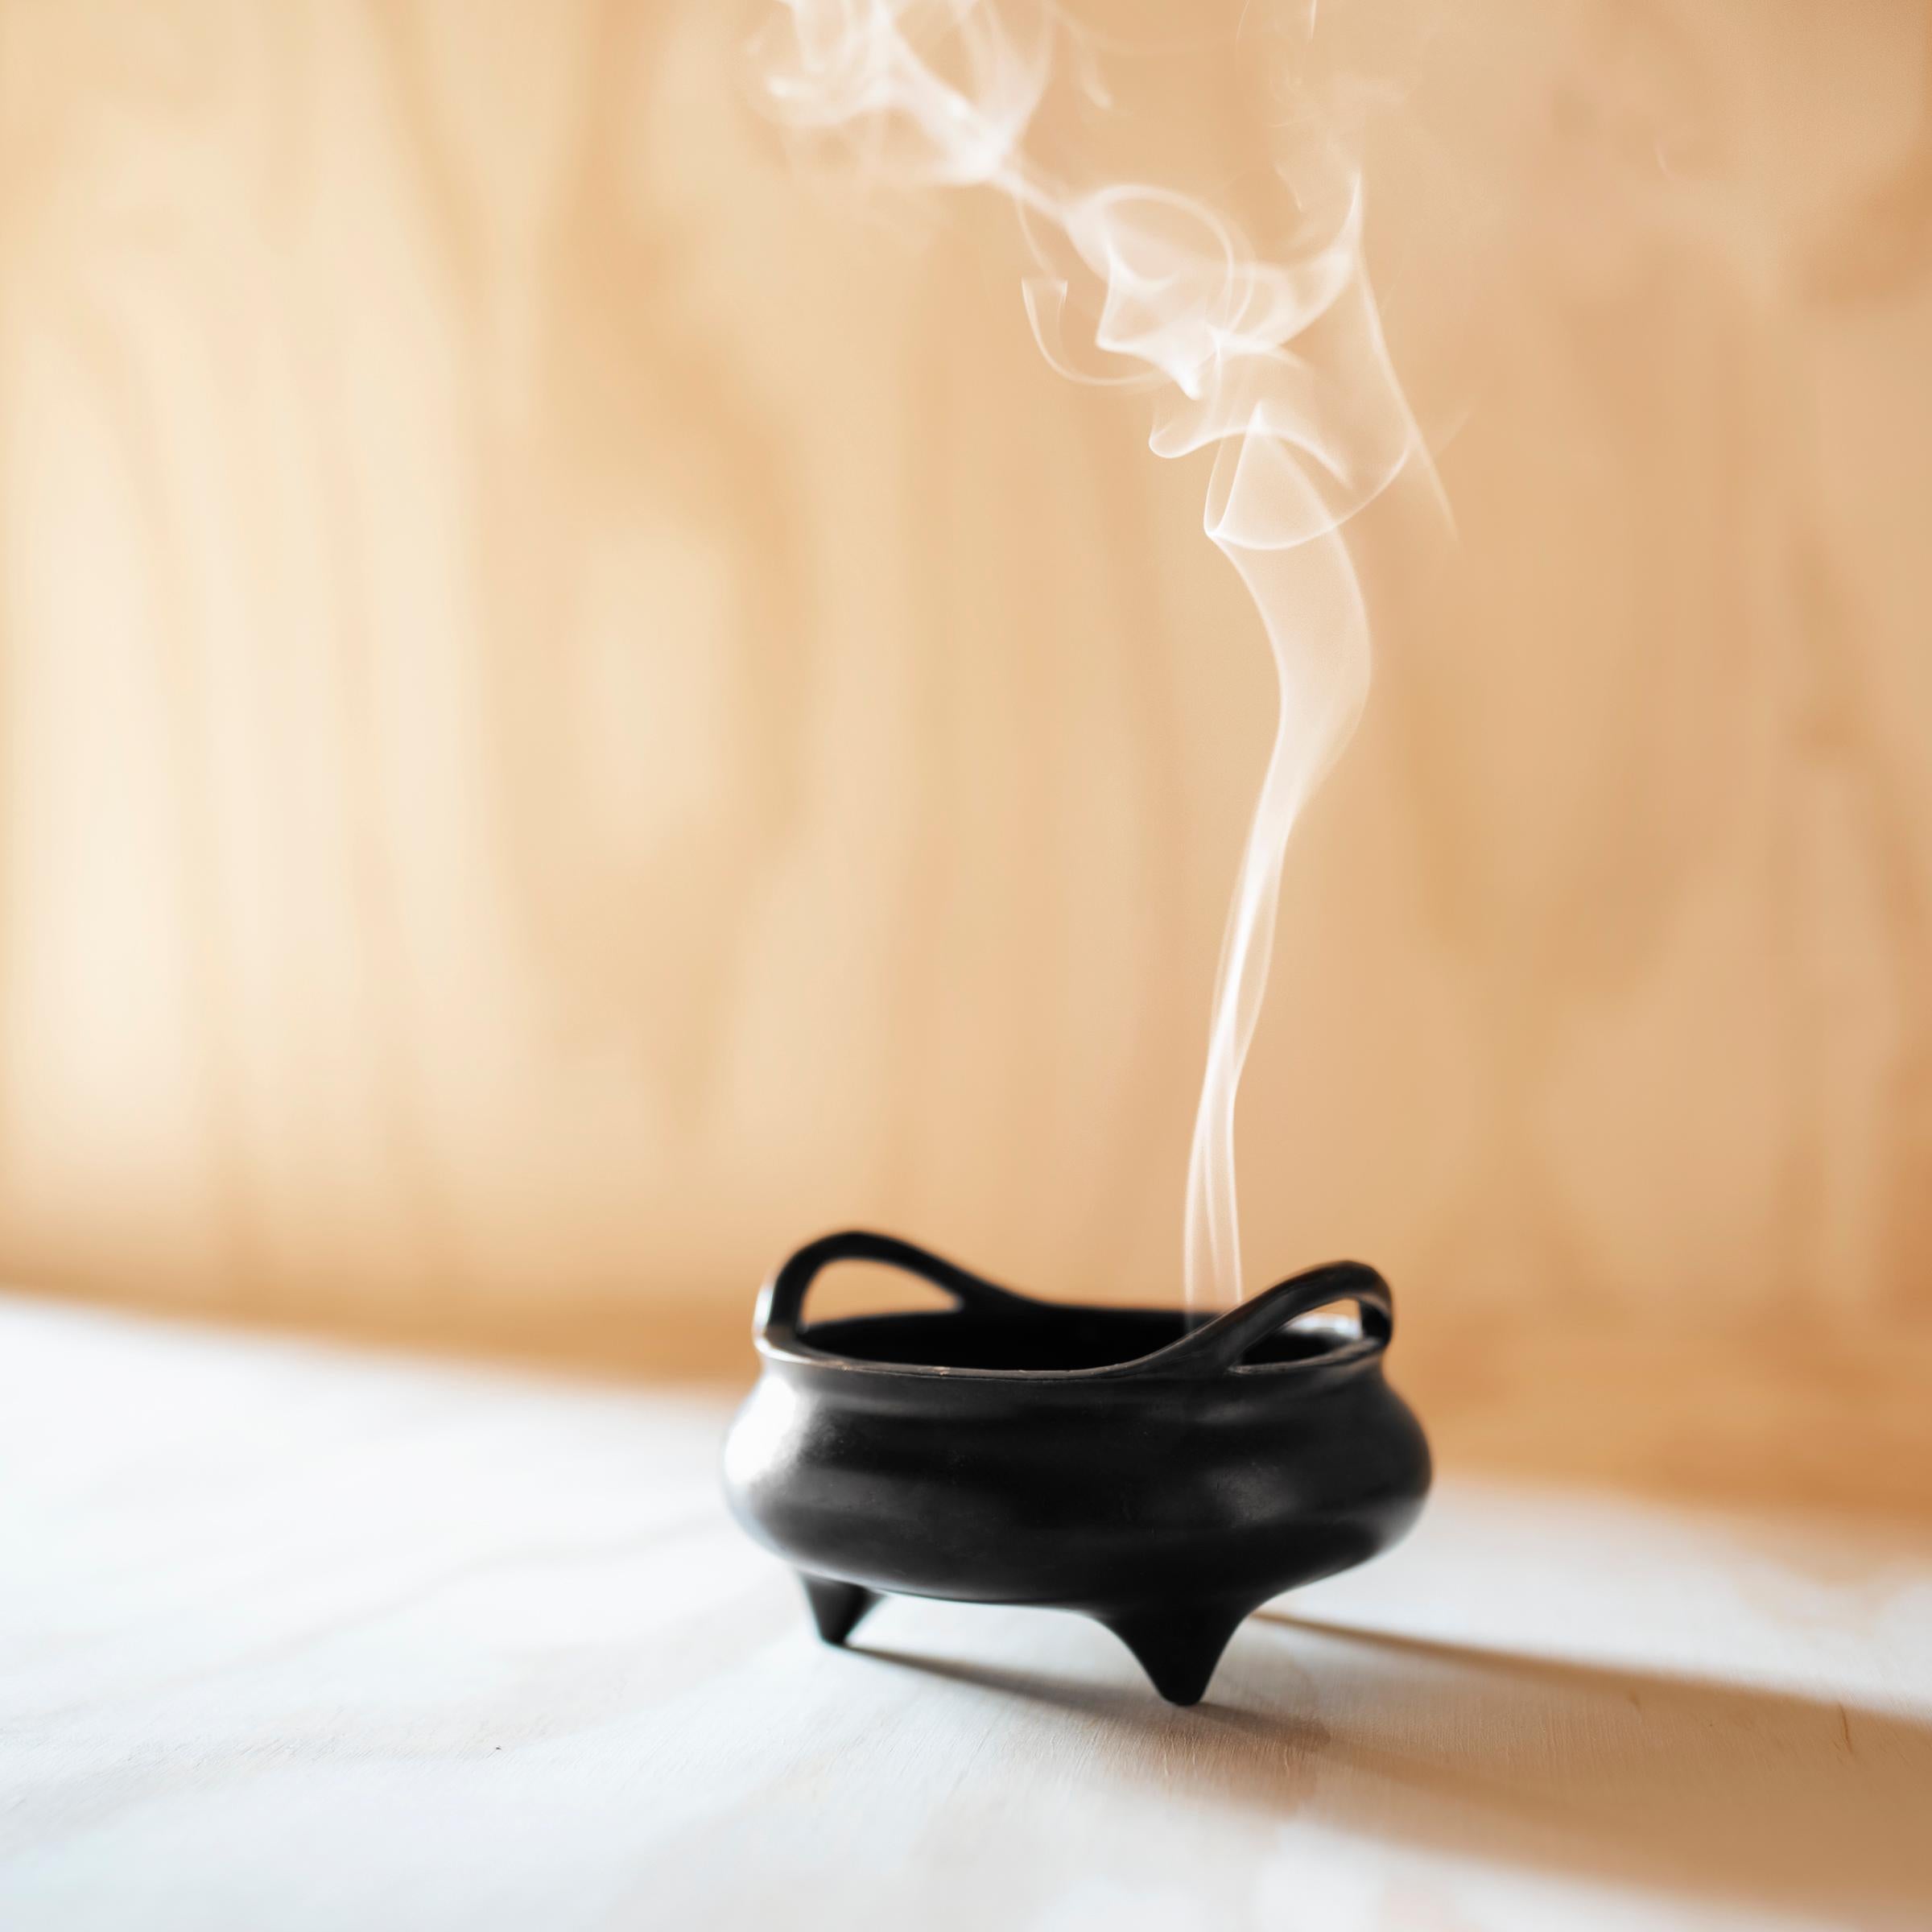 For many centuries, people in China have burned incense in shallow censers such as this, placed within a shrine or atop a home altar. An essential element of ritual prayer, incense is burned to measure the duration of the ritual and as a form of